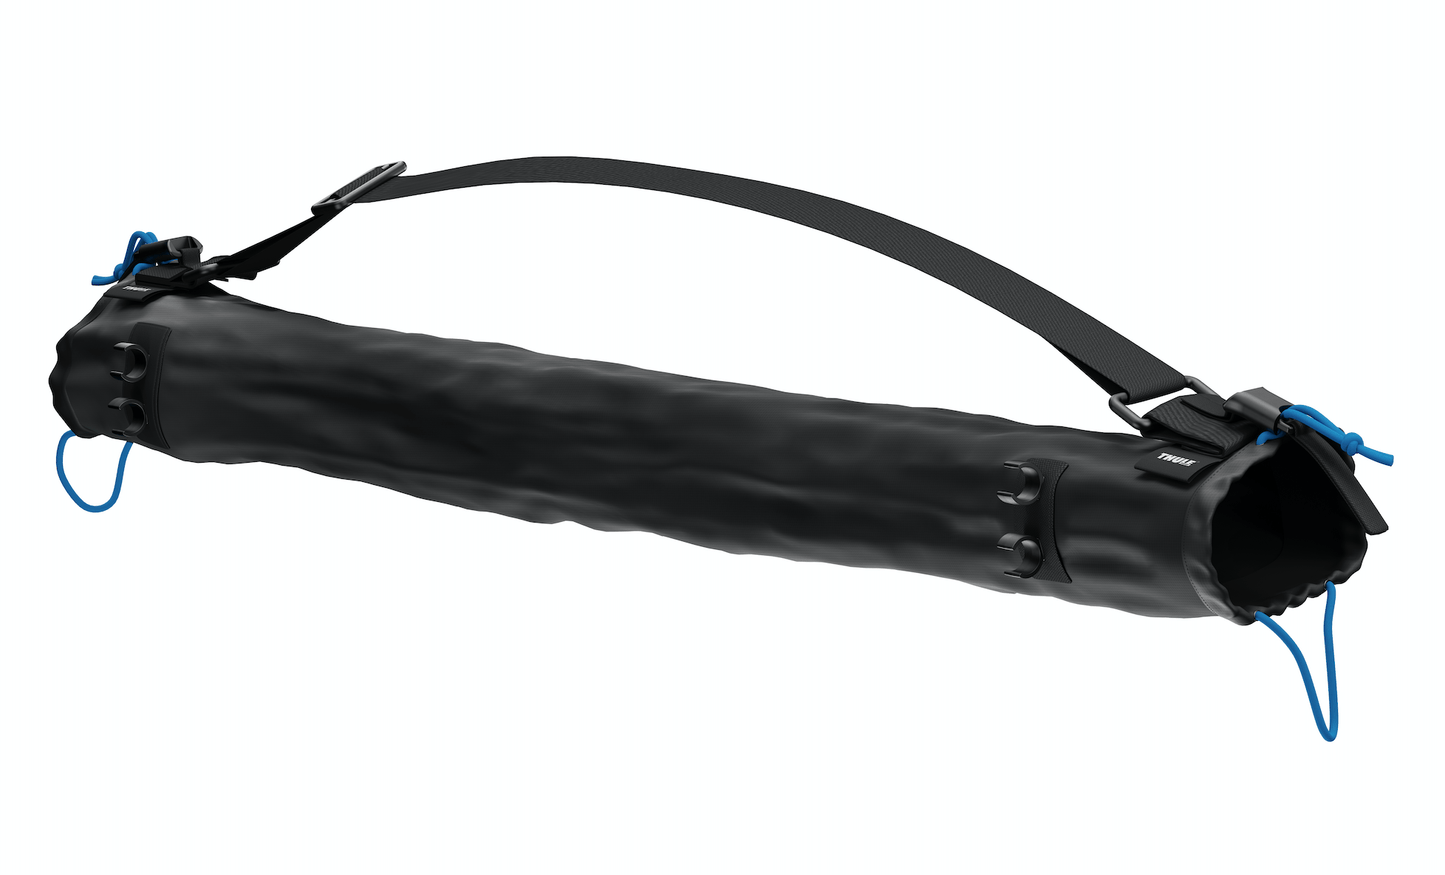 Thule SkiClick Bag - Letang Auto Electrical Vehicle Parts